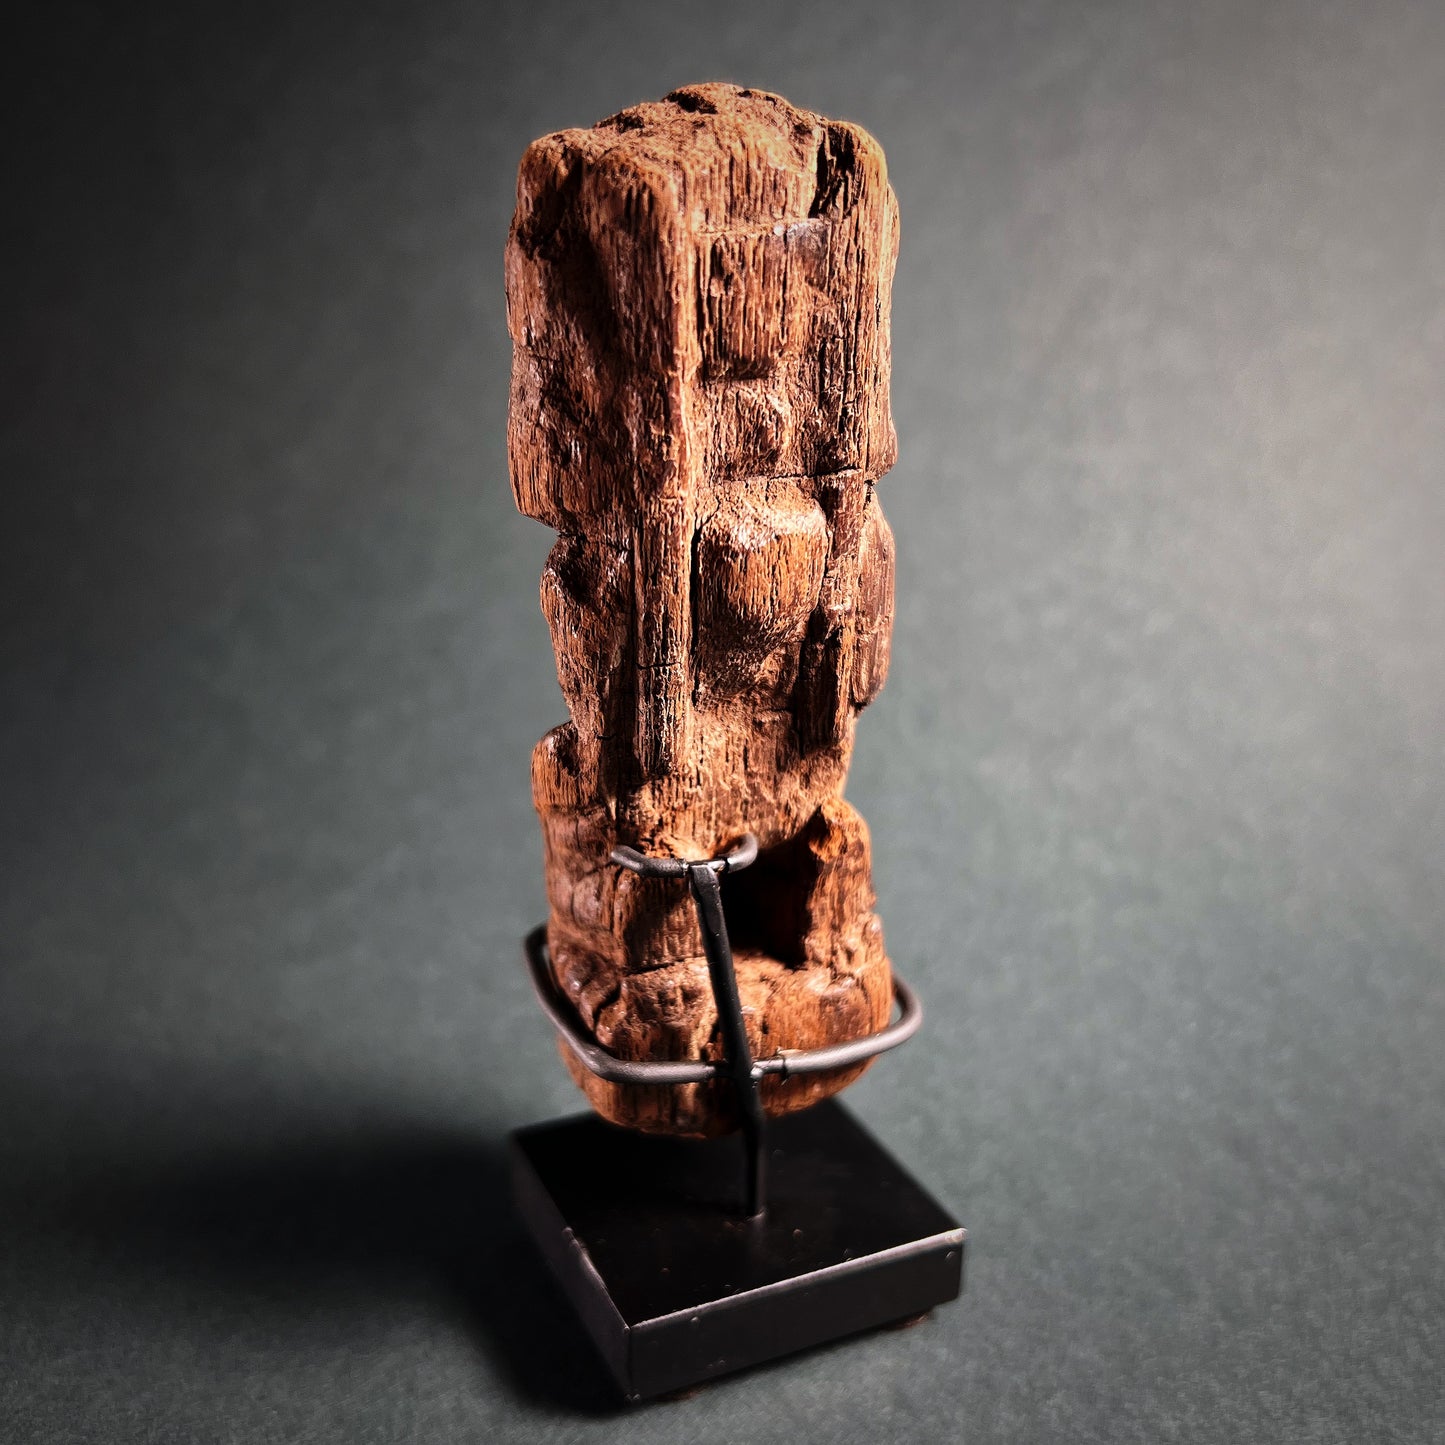 Chimú Wood Figure of a Kneeling Dignitary or Lord King